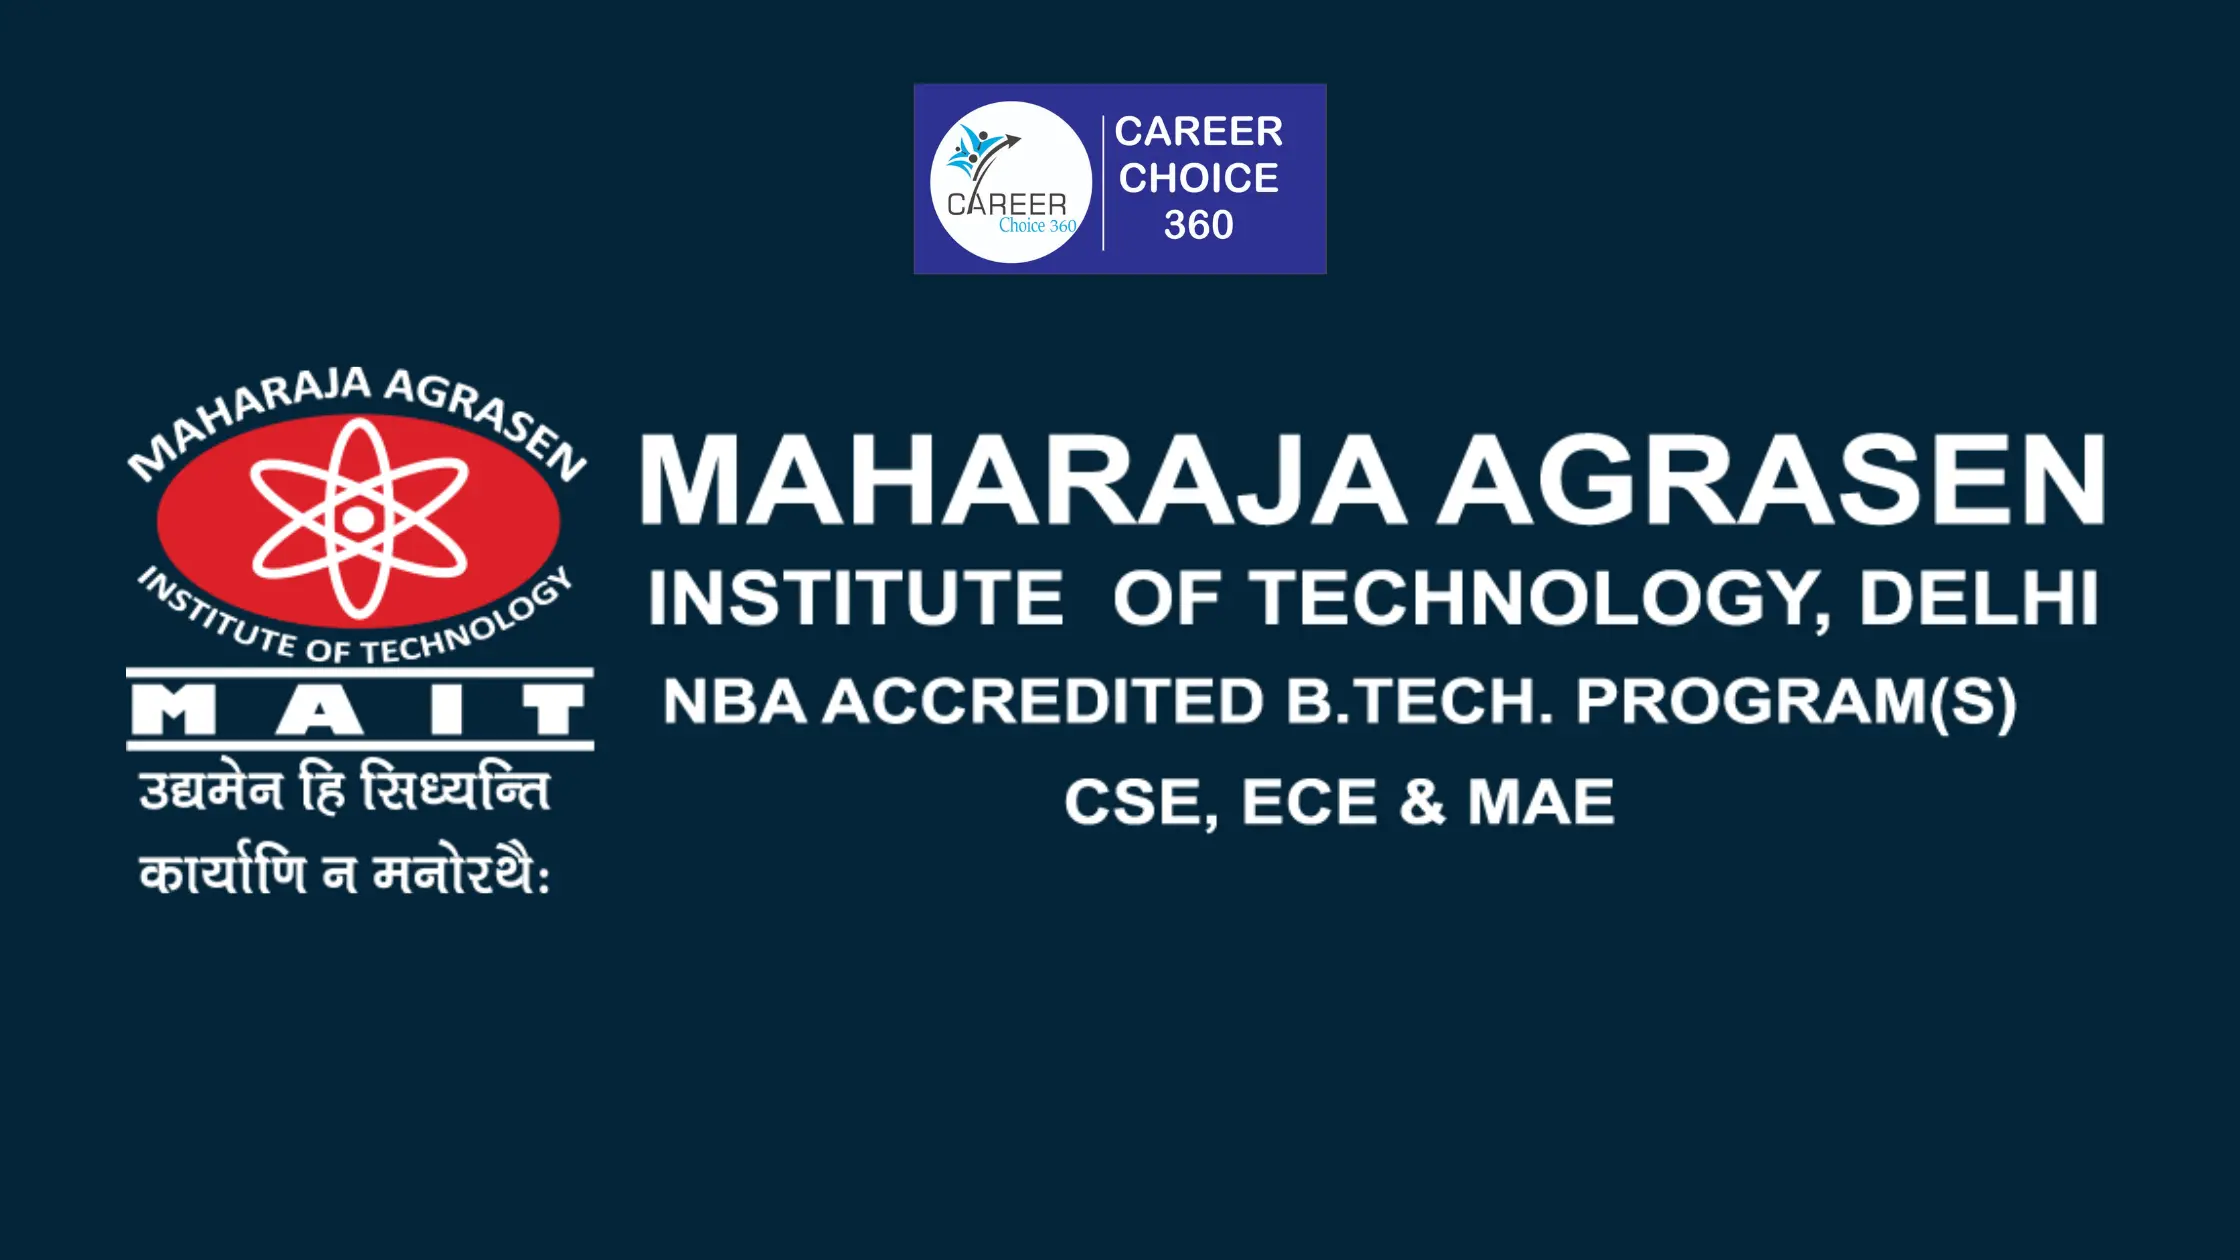 You are currently viewing Maharaja Agrasen Institute of Technology (MAIT) : Courses, Ranking, Fees, Admission, Cutoff, Placement, Ranking